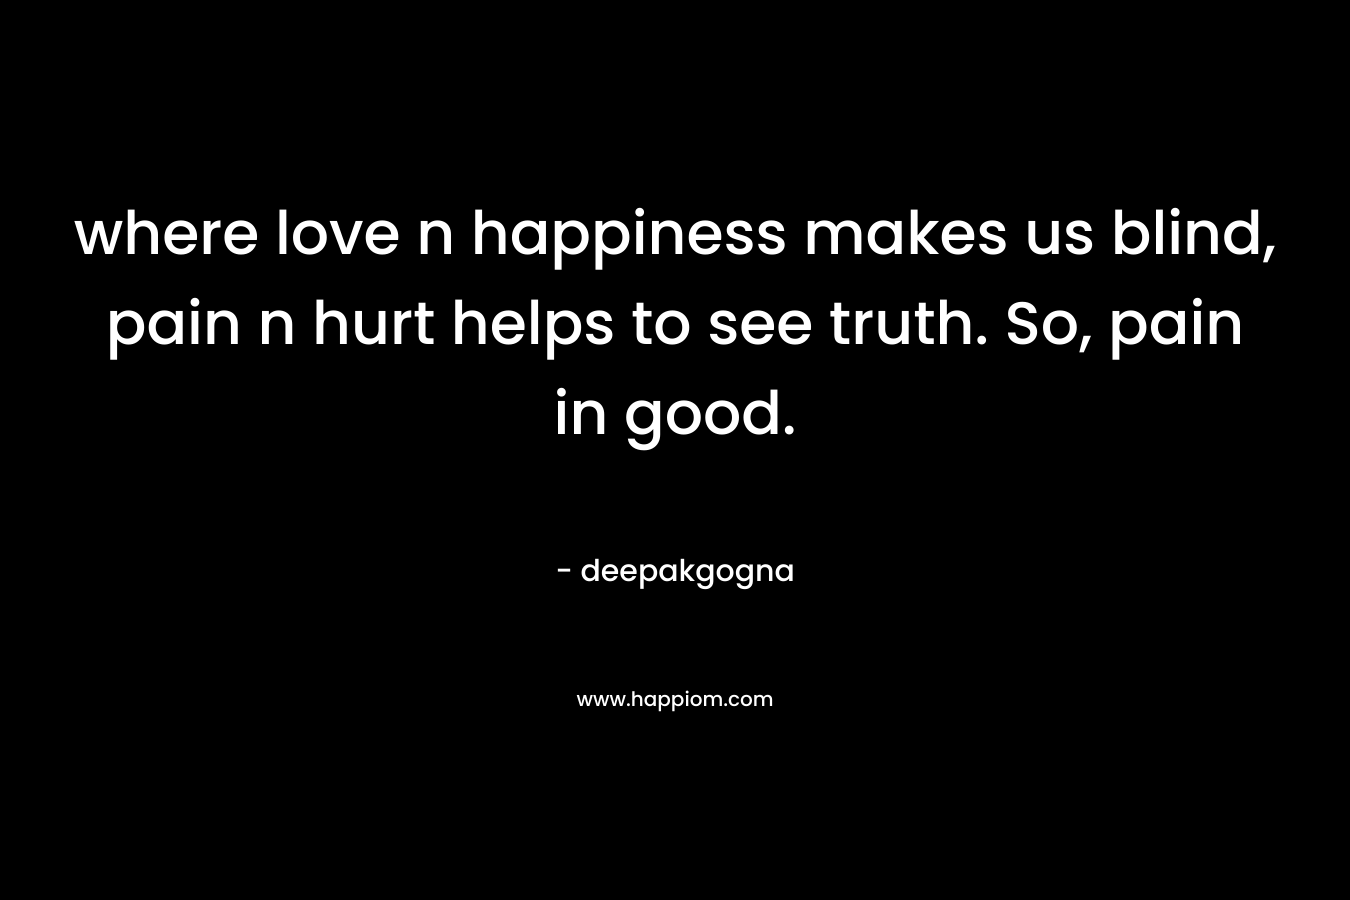 where love n happiness makes us blind, pain n hurt helps to see truth. So, pain in good.